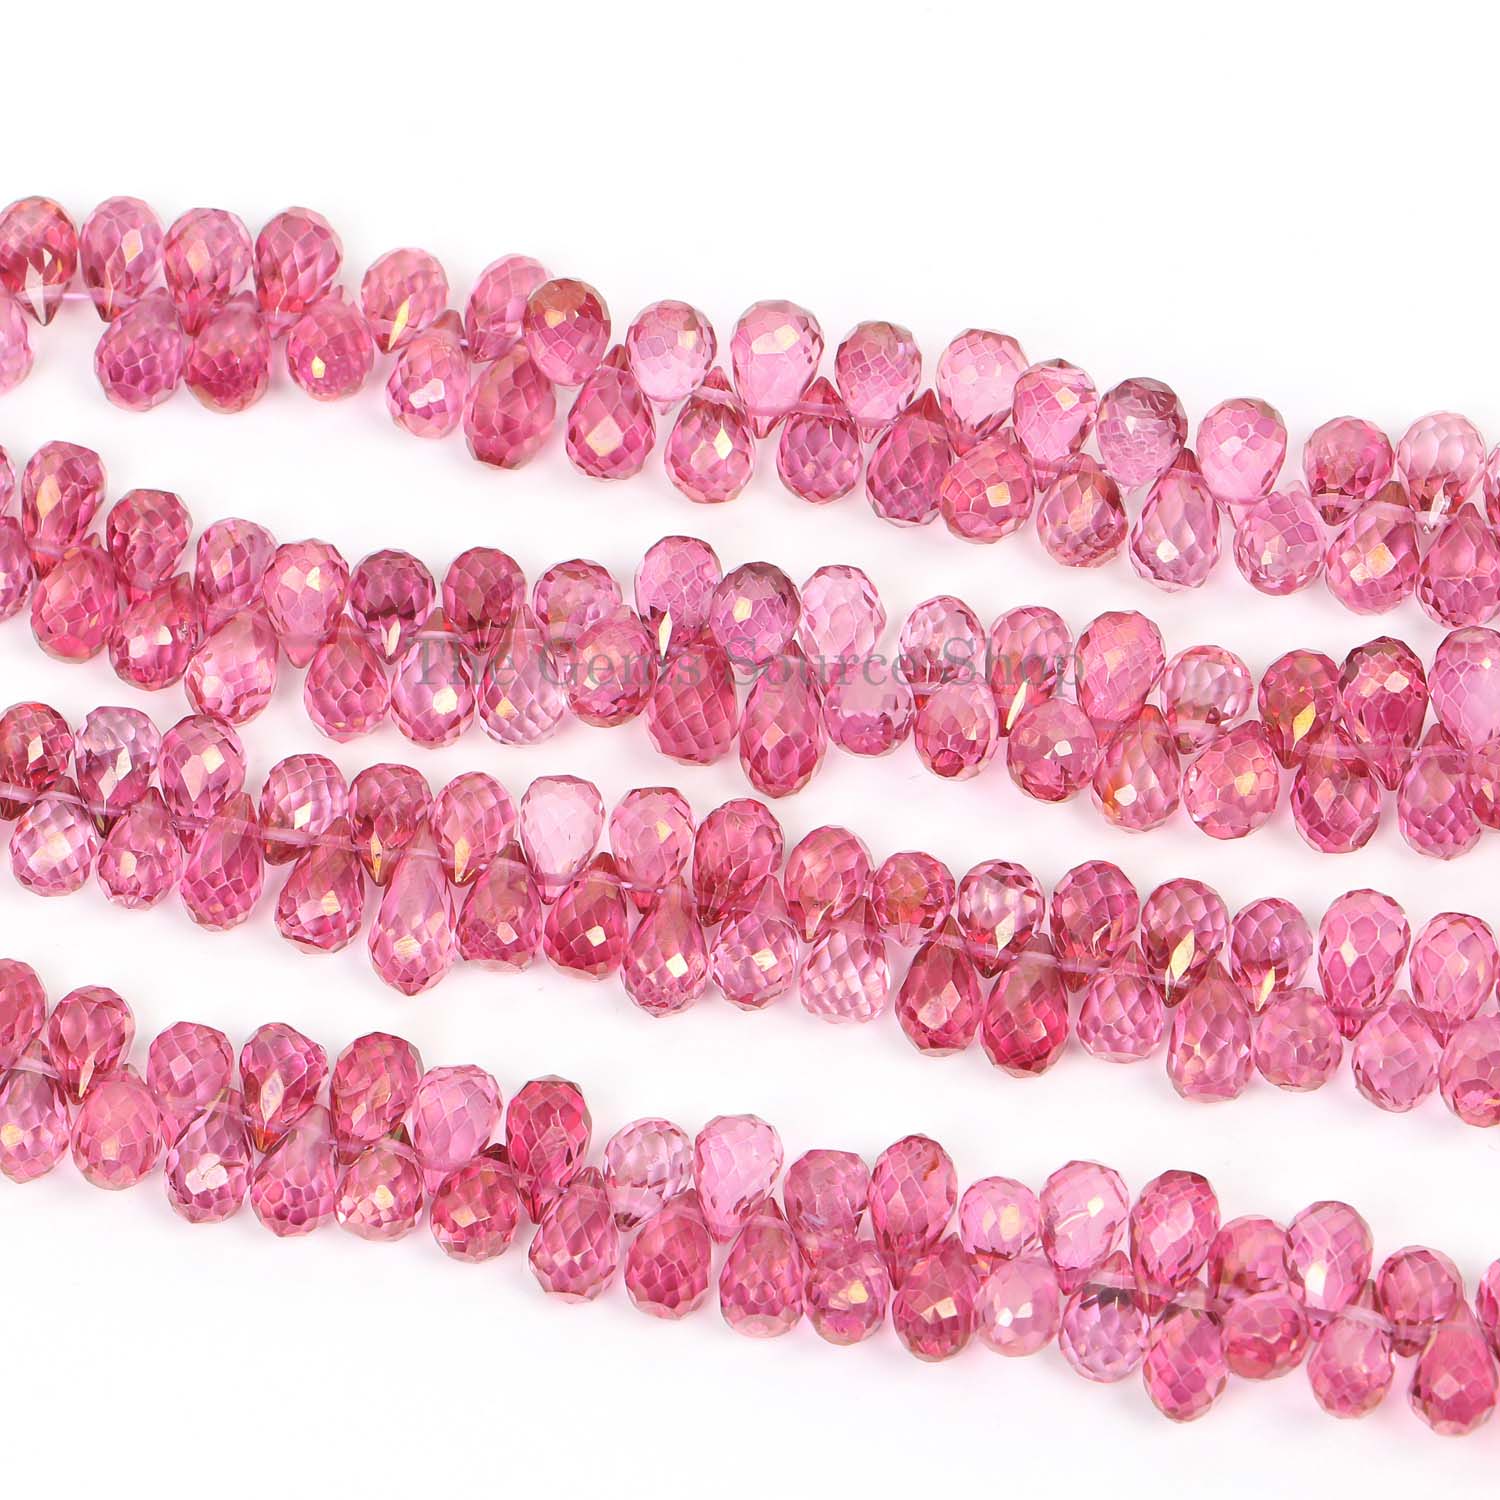 Pink Mystic Topaz Faceted Drops Beads, Gemstone Beads, Tear Drop Briolette